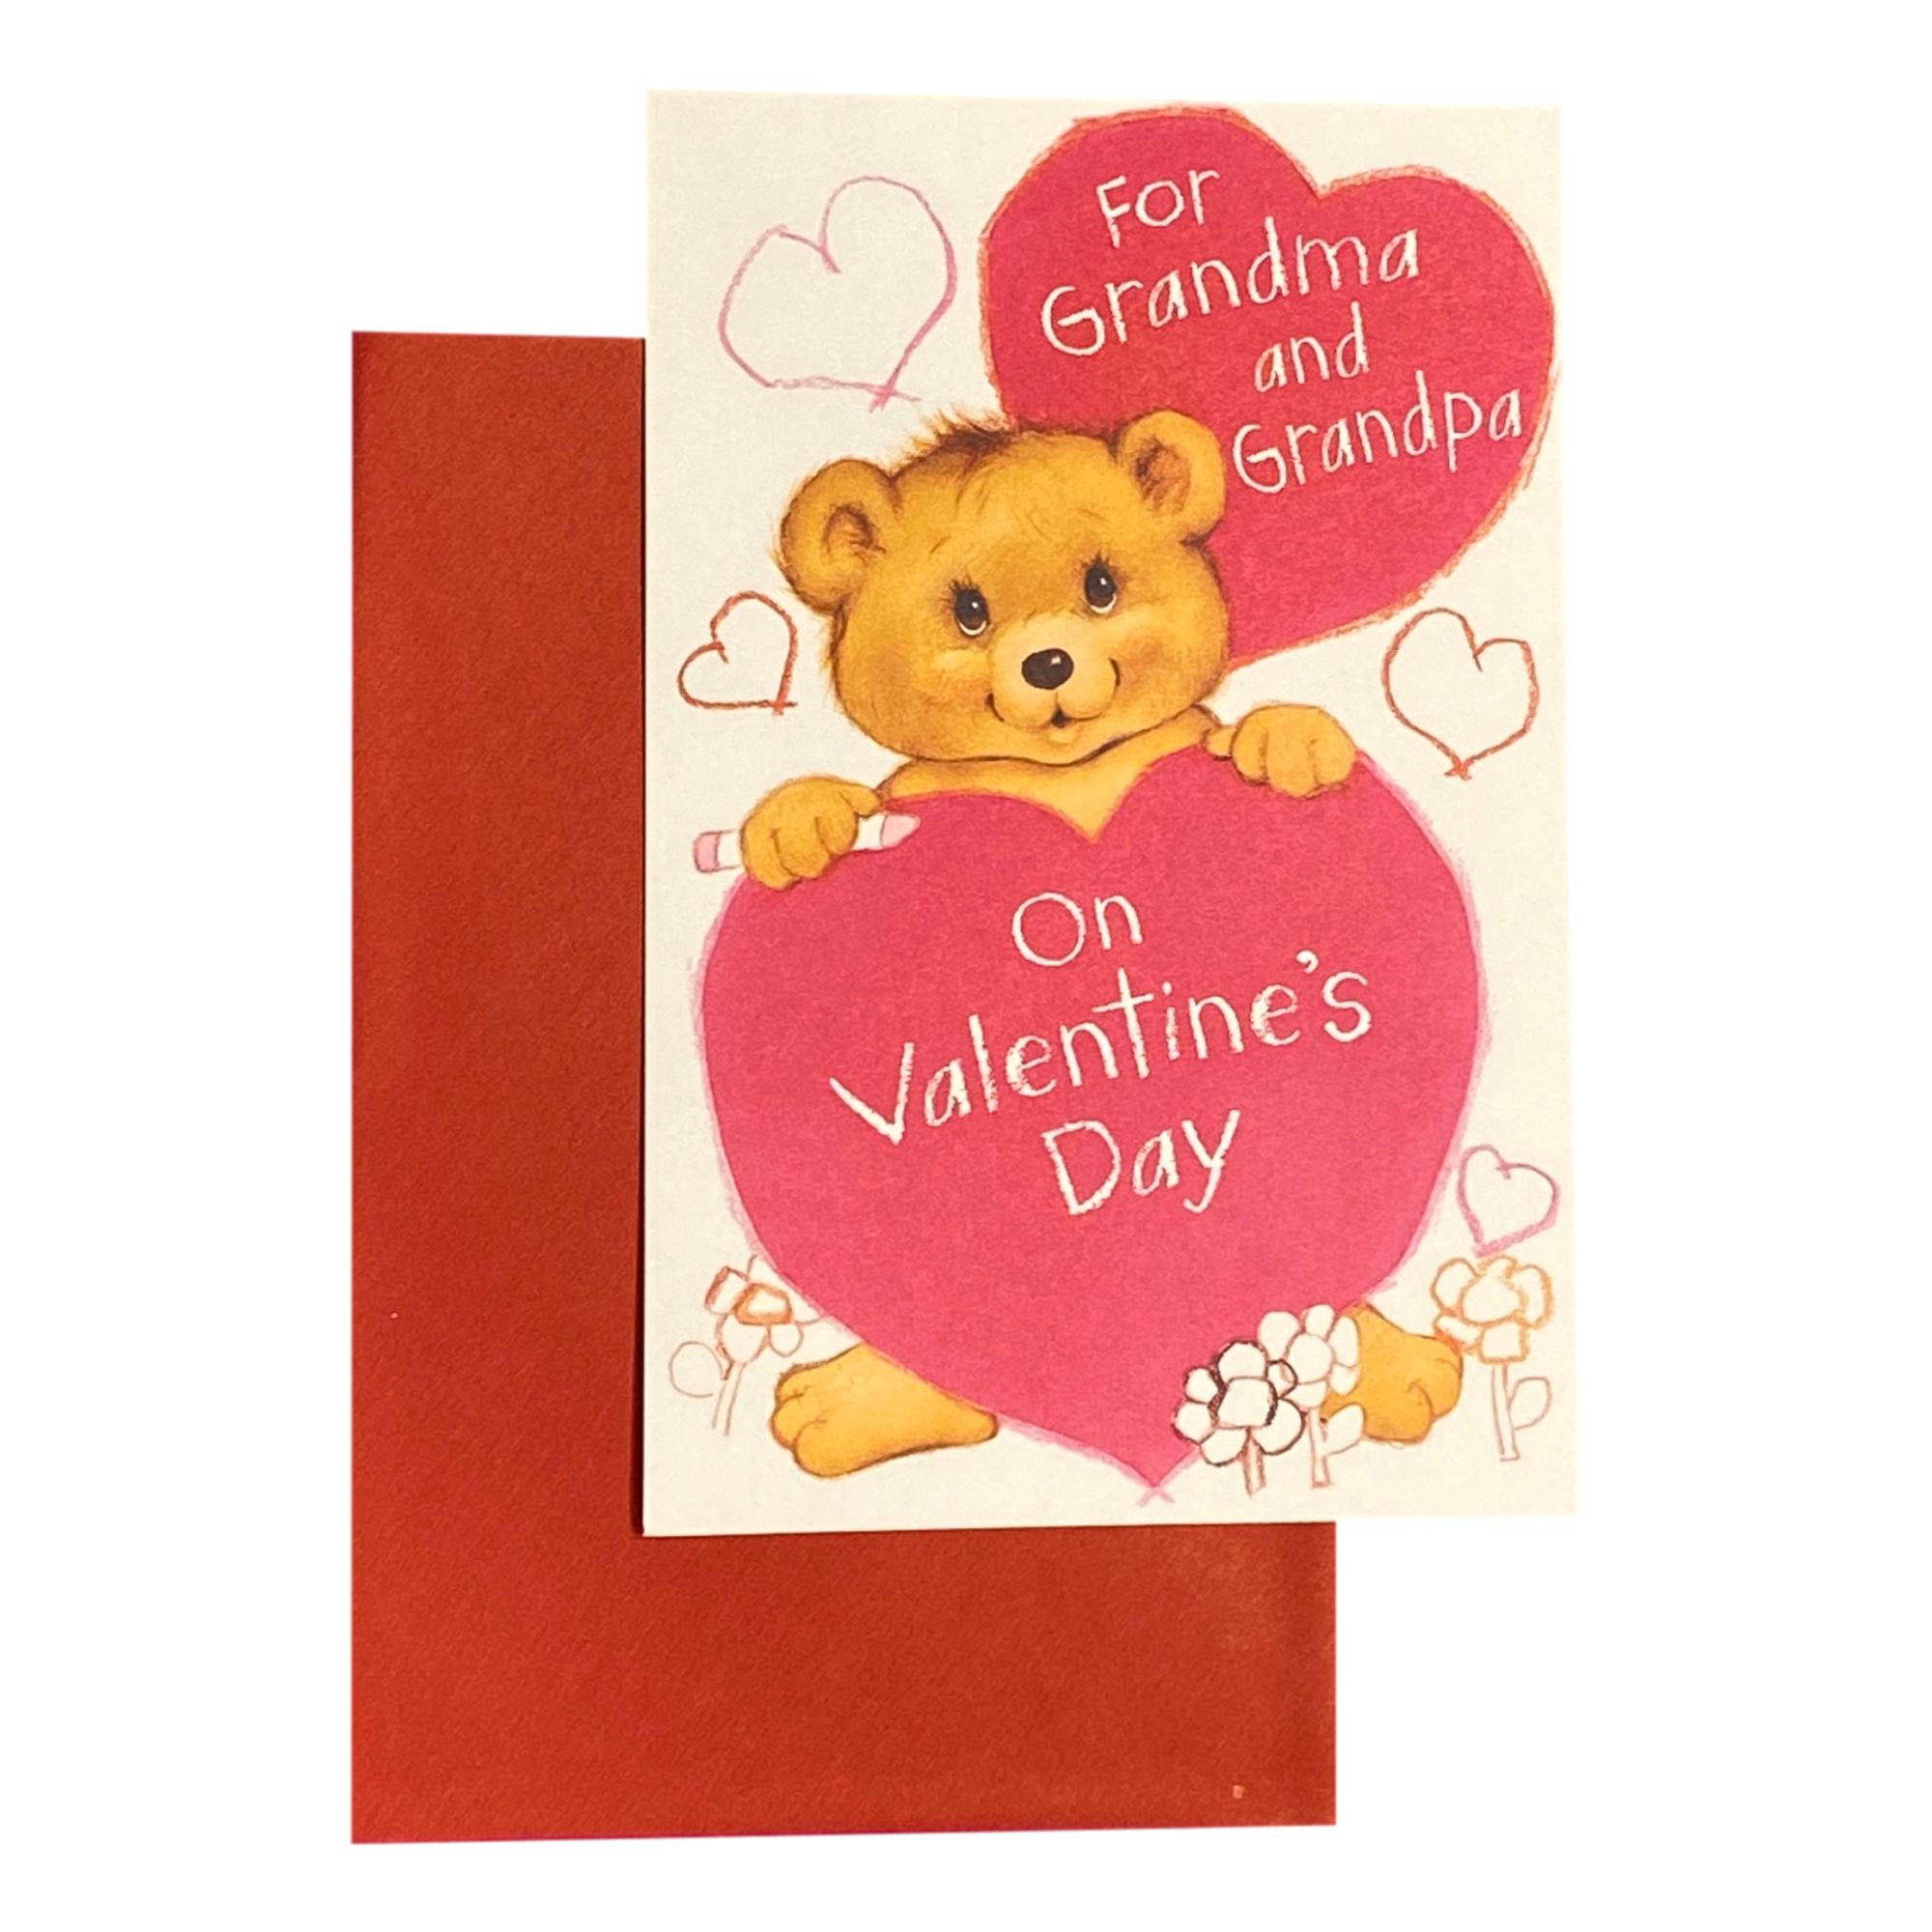 Download Valentines Day Greeting Card For Grandma For Grandma And Grandpa On Valentine Ebay